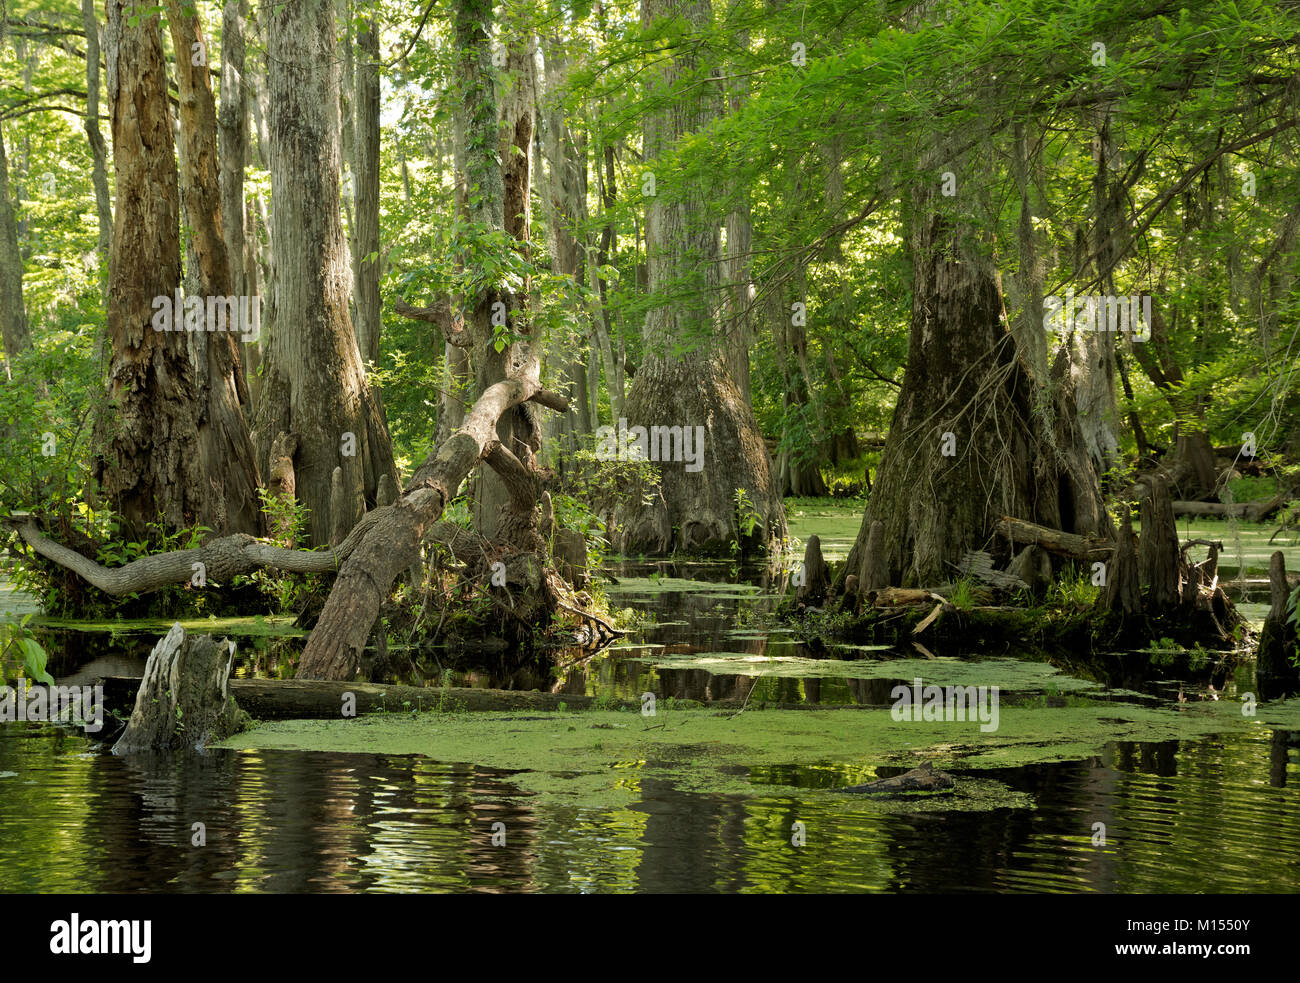 NC01492-00...NORTH CAROLINA - Bald cypress trees, with knees, and tupelo gum trees surrounded by a mat of duckweed in Merchant Millpond State Park. Stock Photo